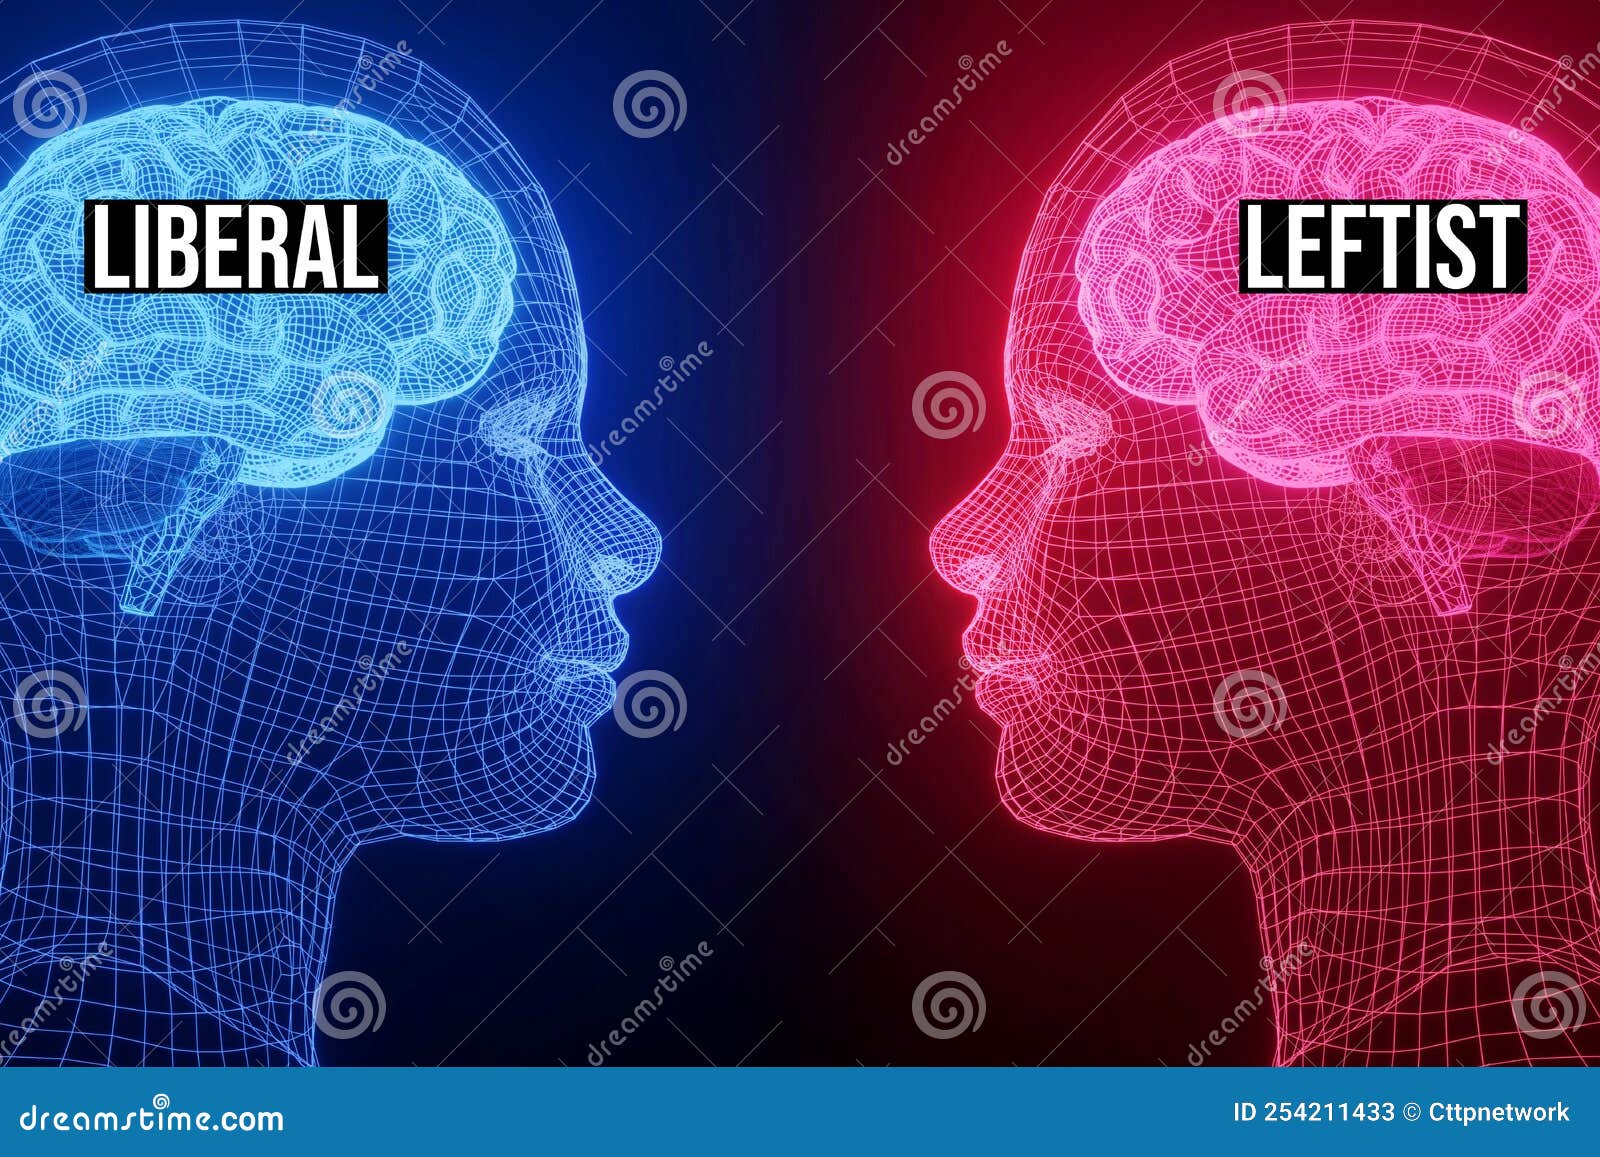 liberal vs leftist concept background with glowing brains in red and blue.